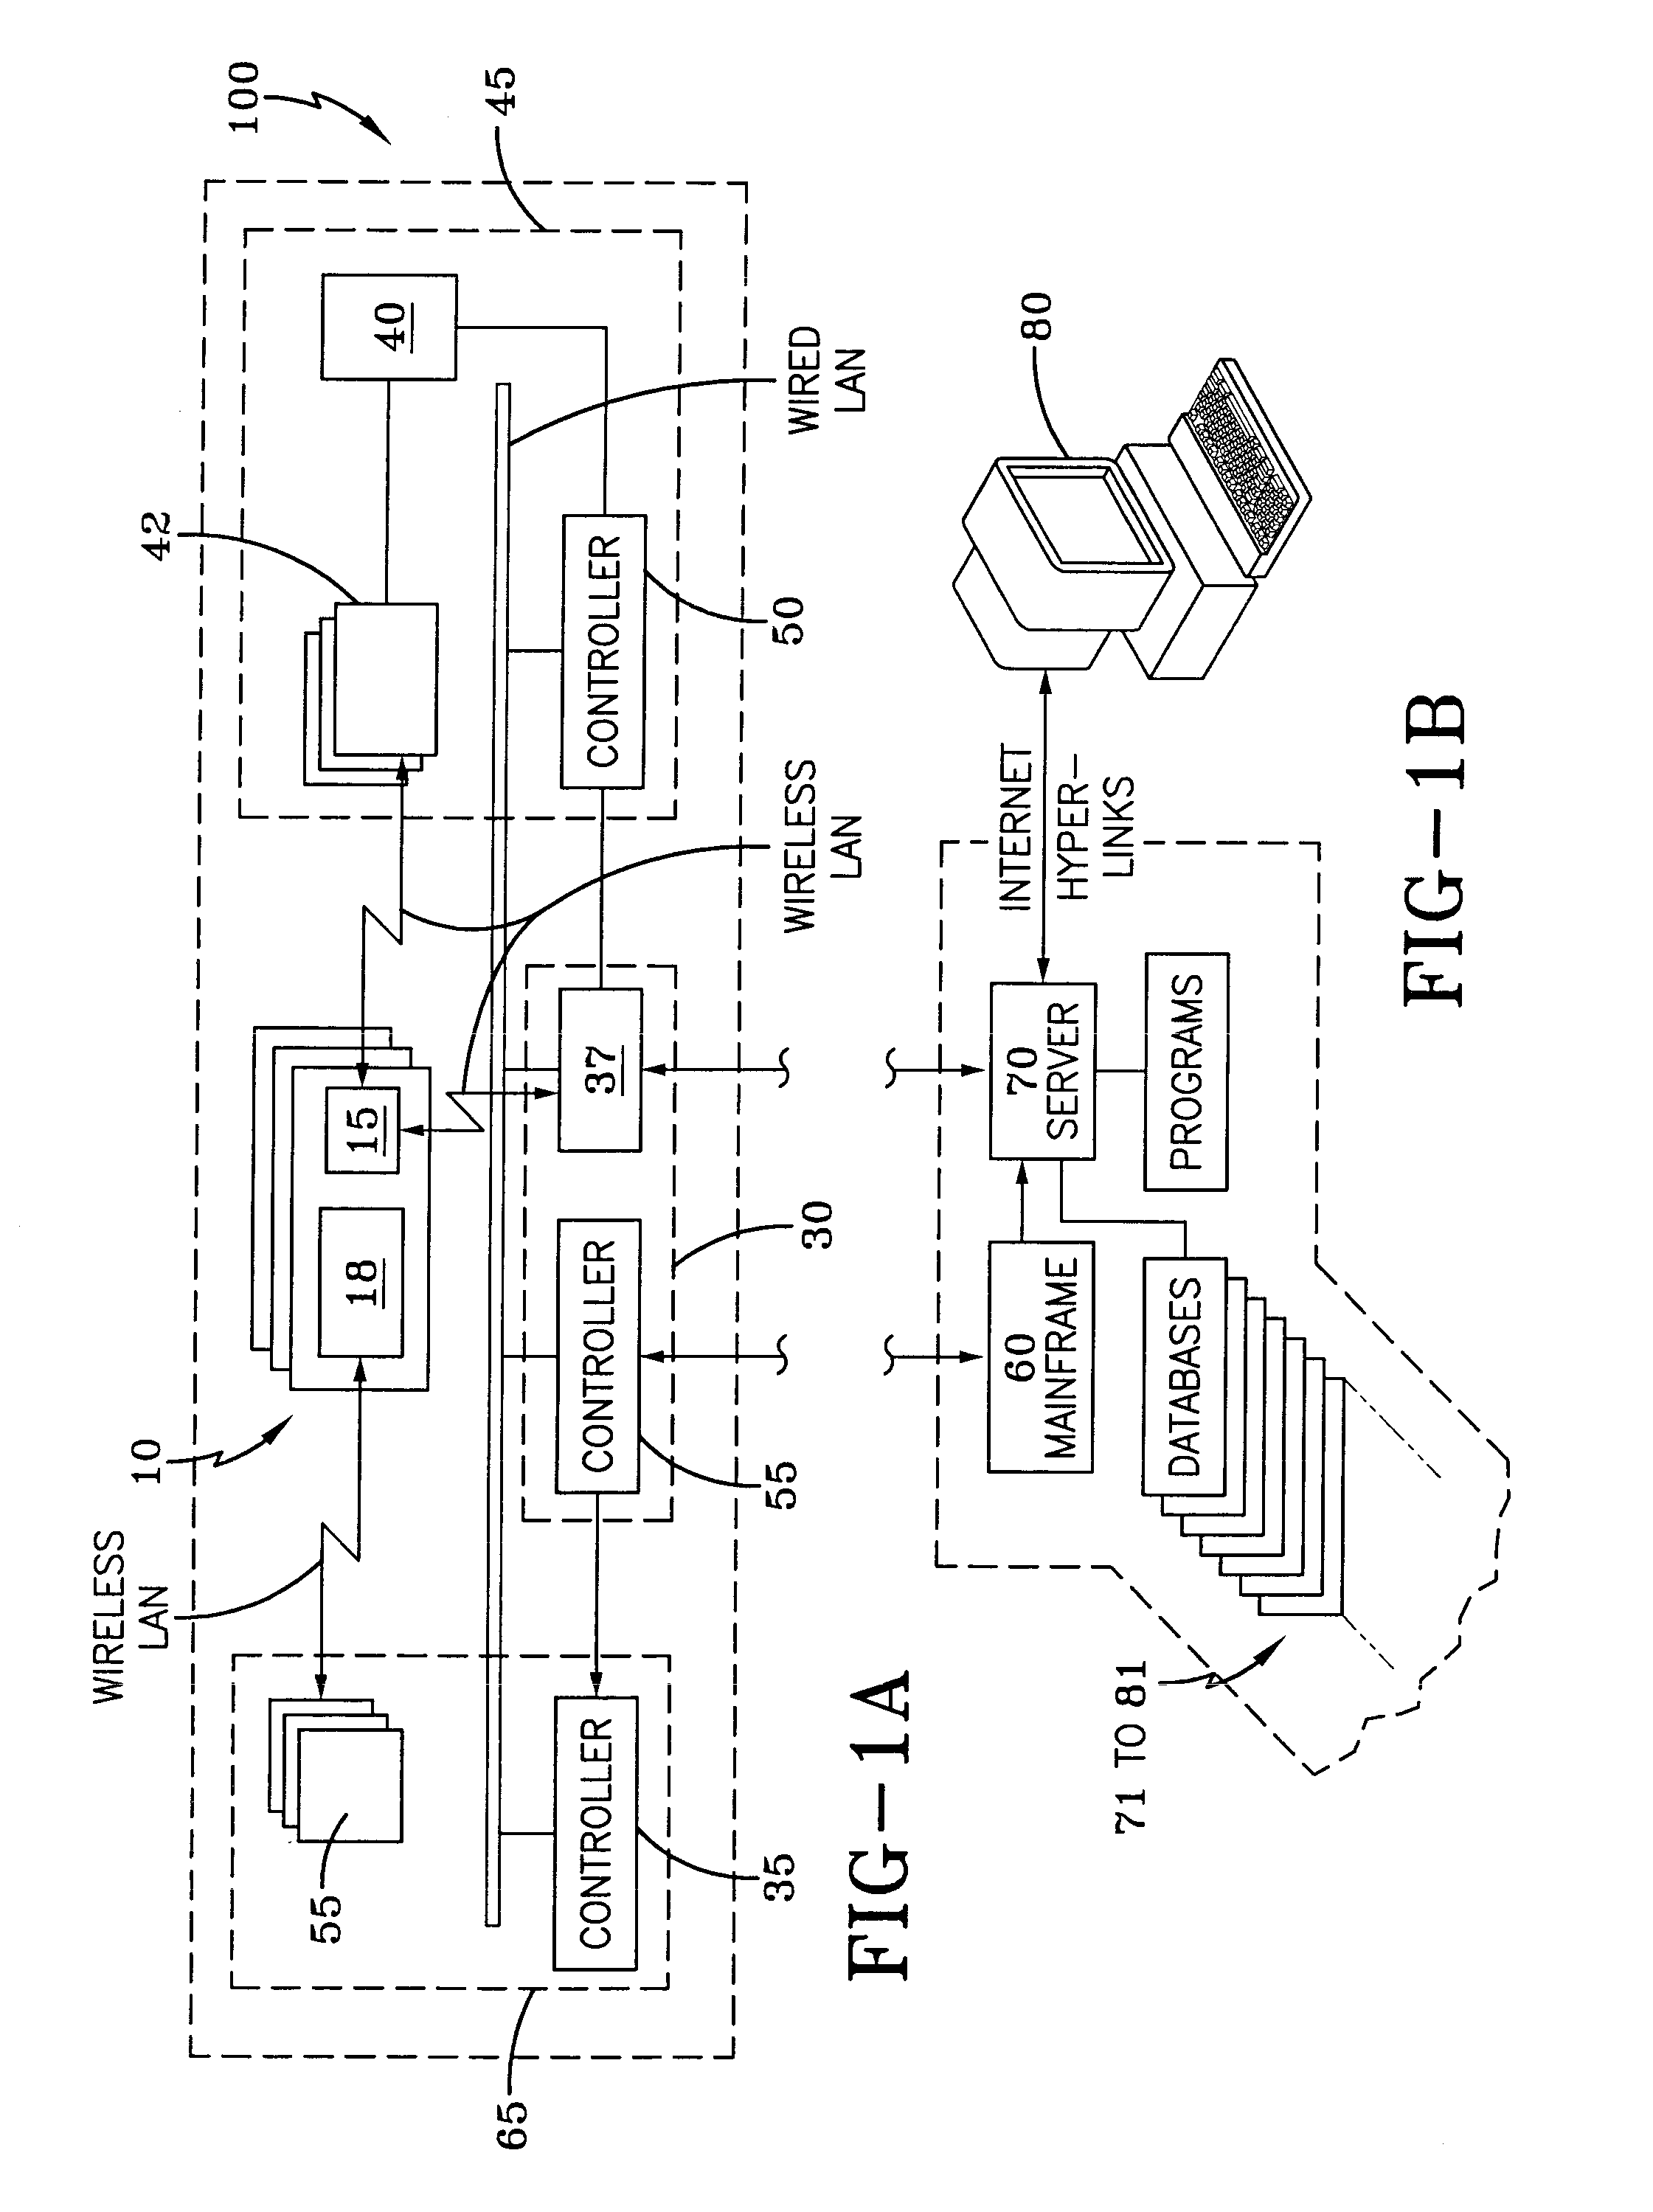 Methods and systems for providing personalized information to users in a commercial establishment